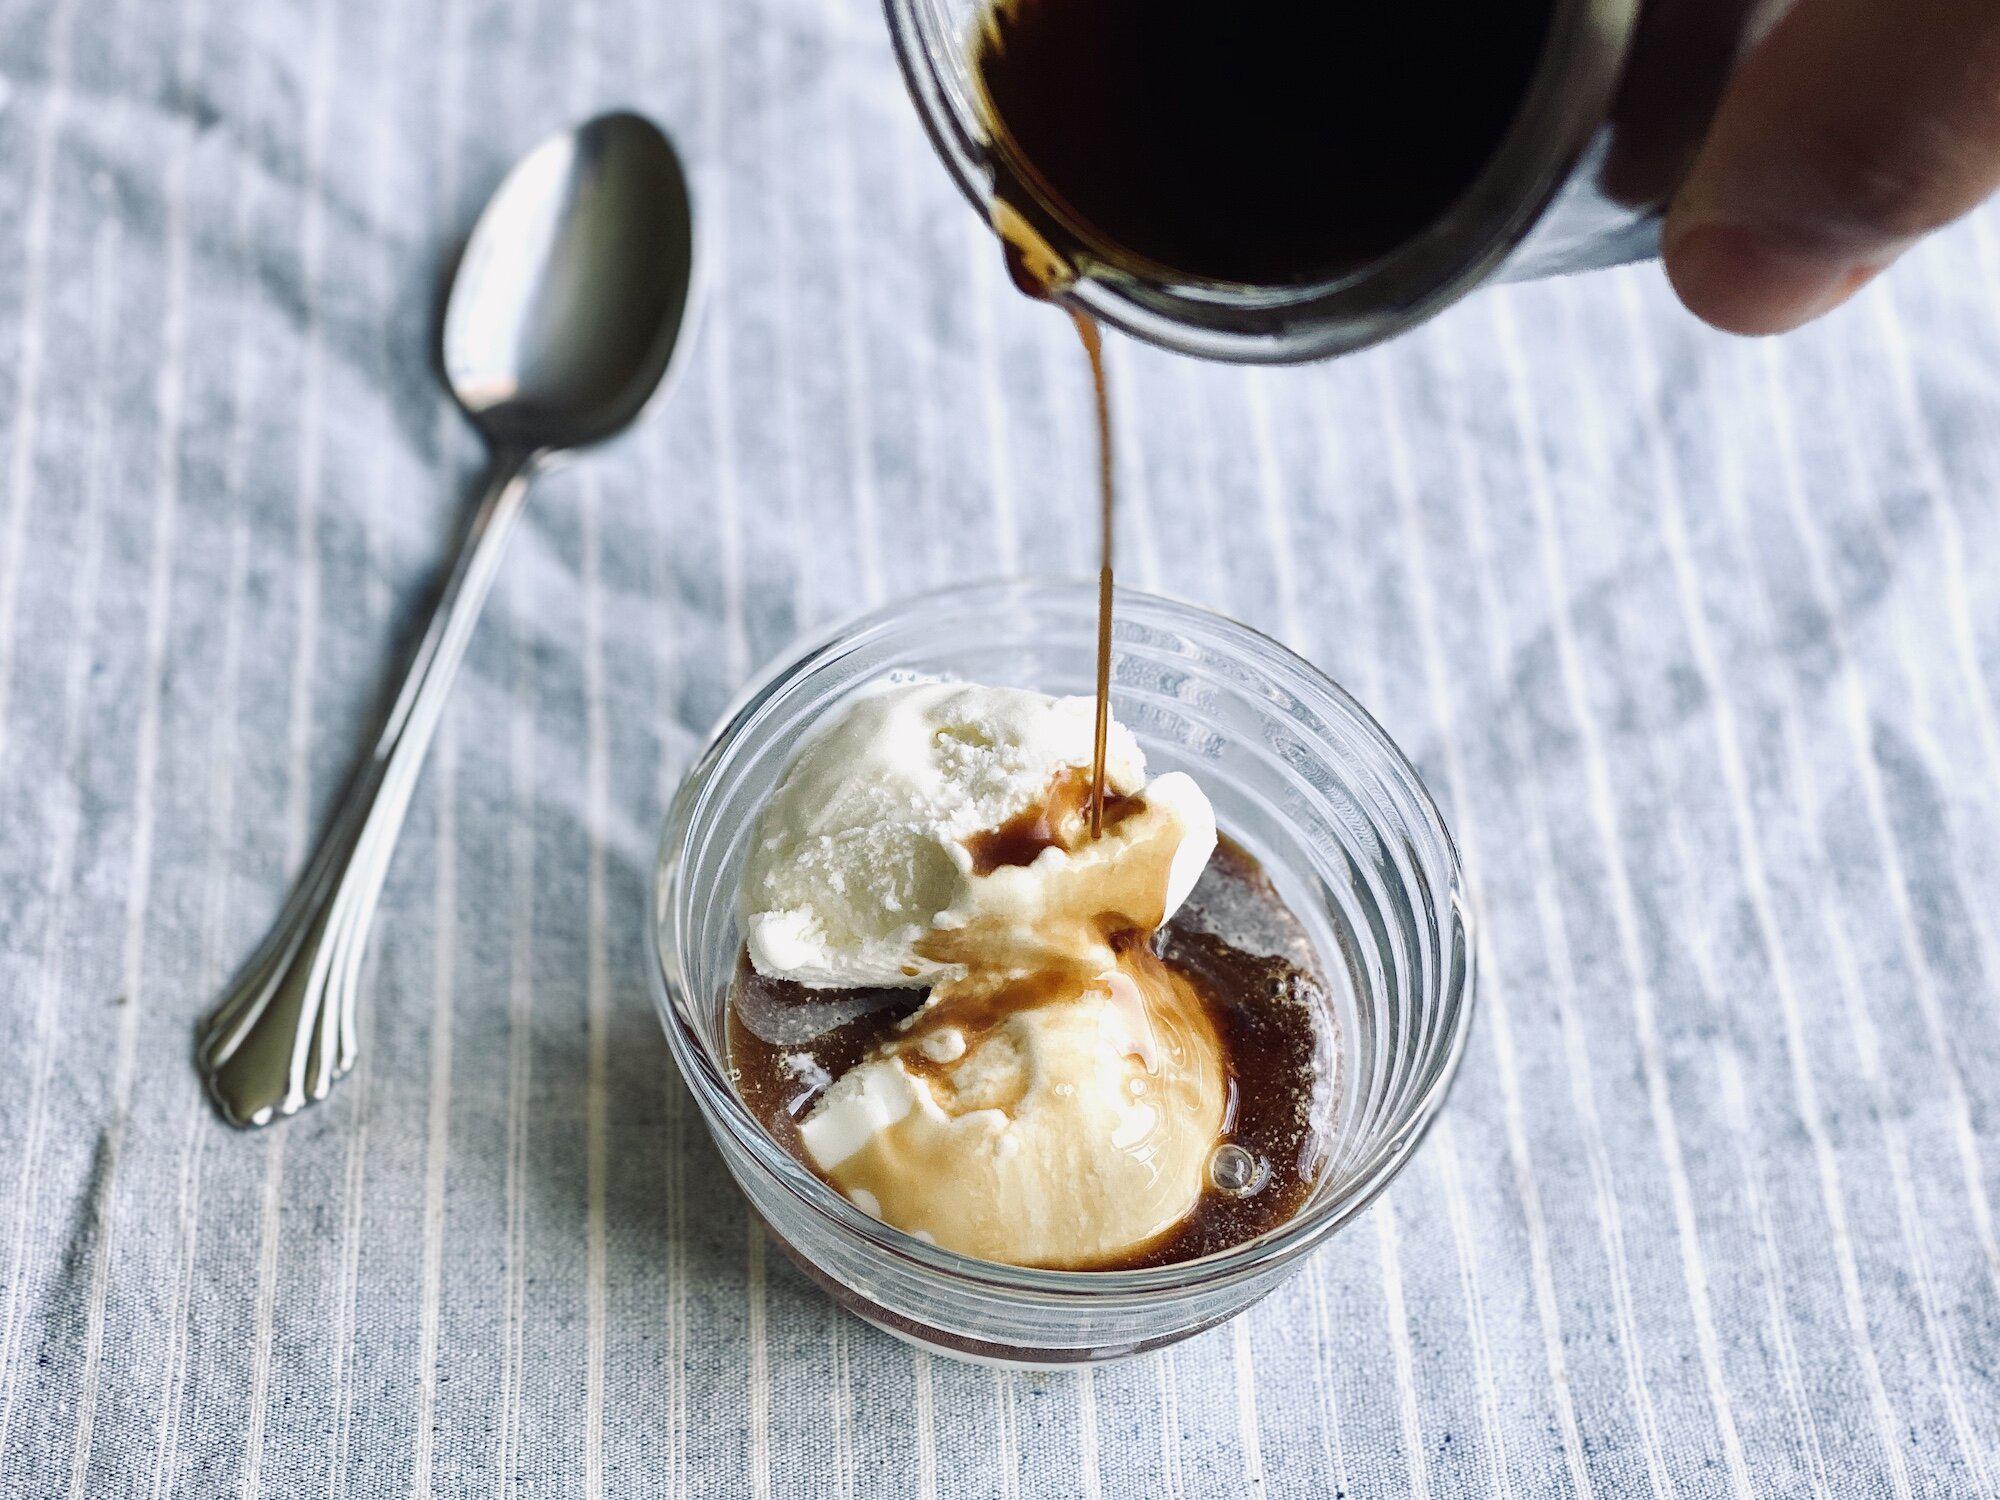 Espresso over gelato is the perfect ending for a warm-weather meal